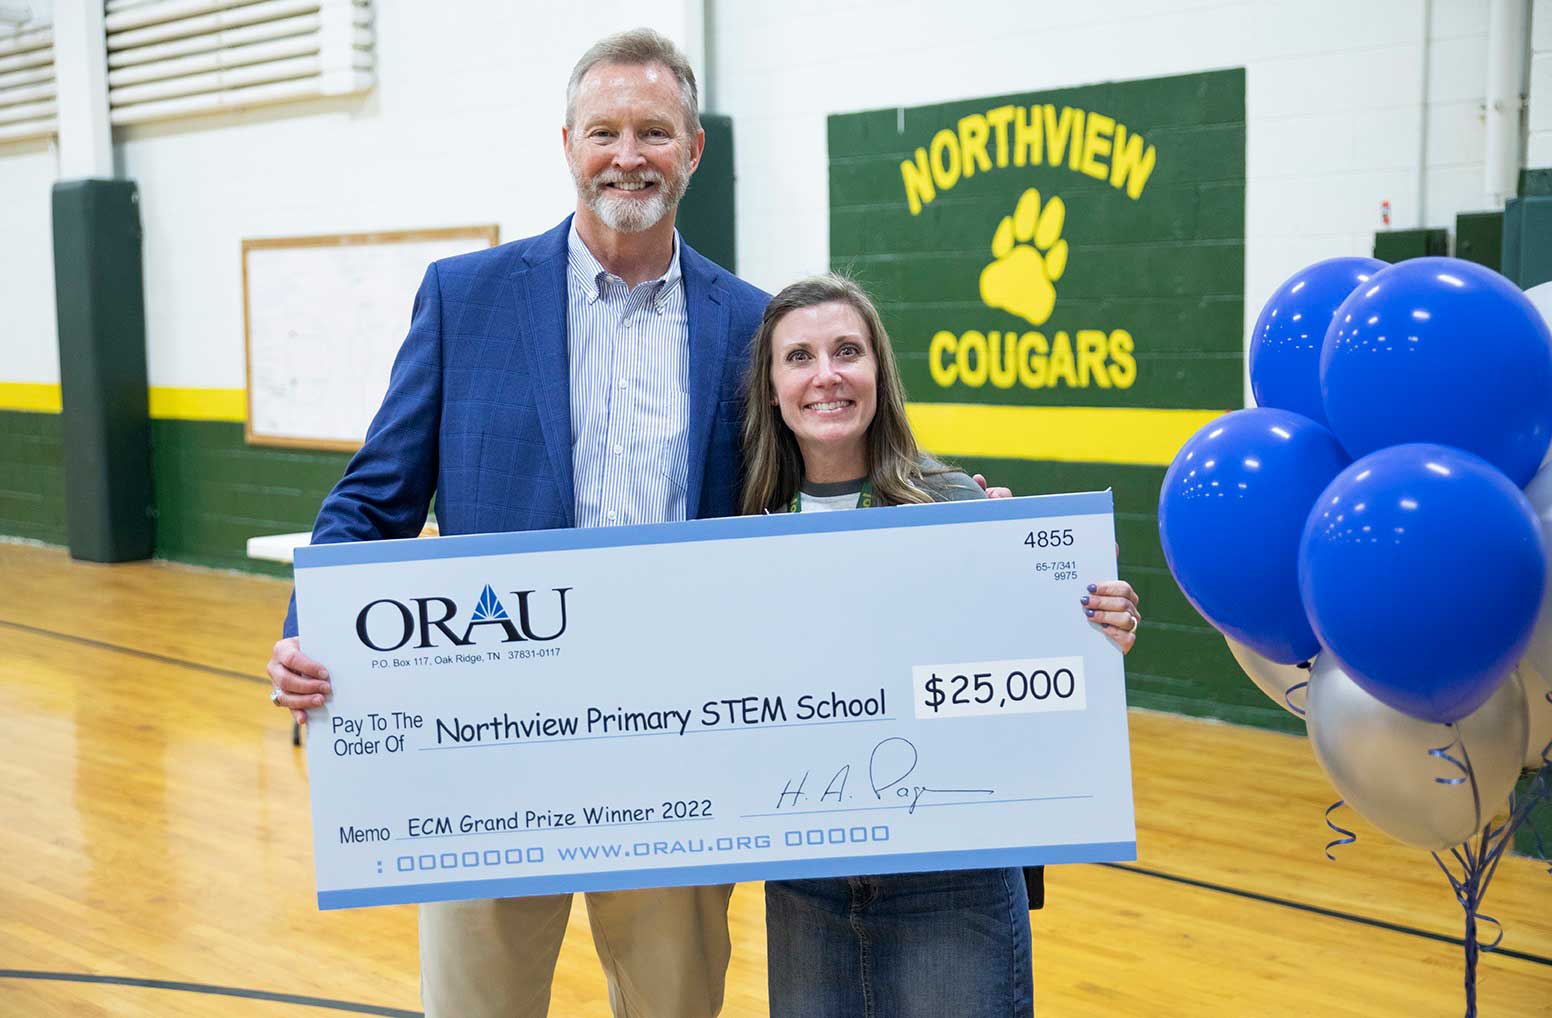 ORAU awards $25,000 to Stacey Whaley at Northview Primary STEM School in annual Extreme Classroom Makeover competition